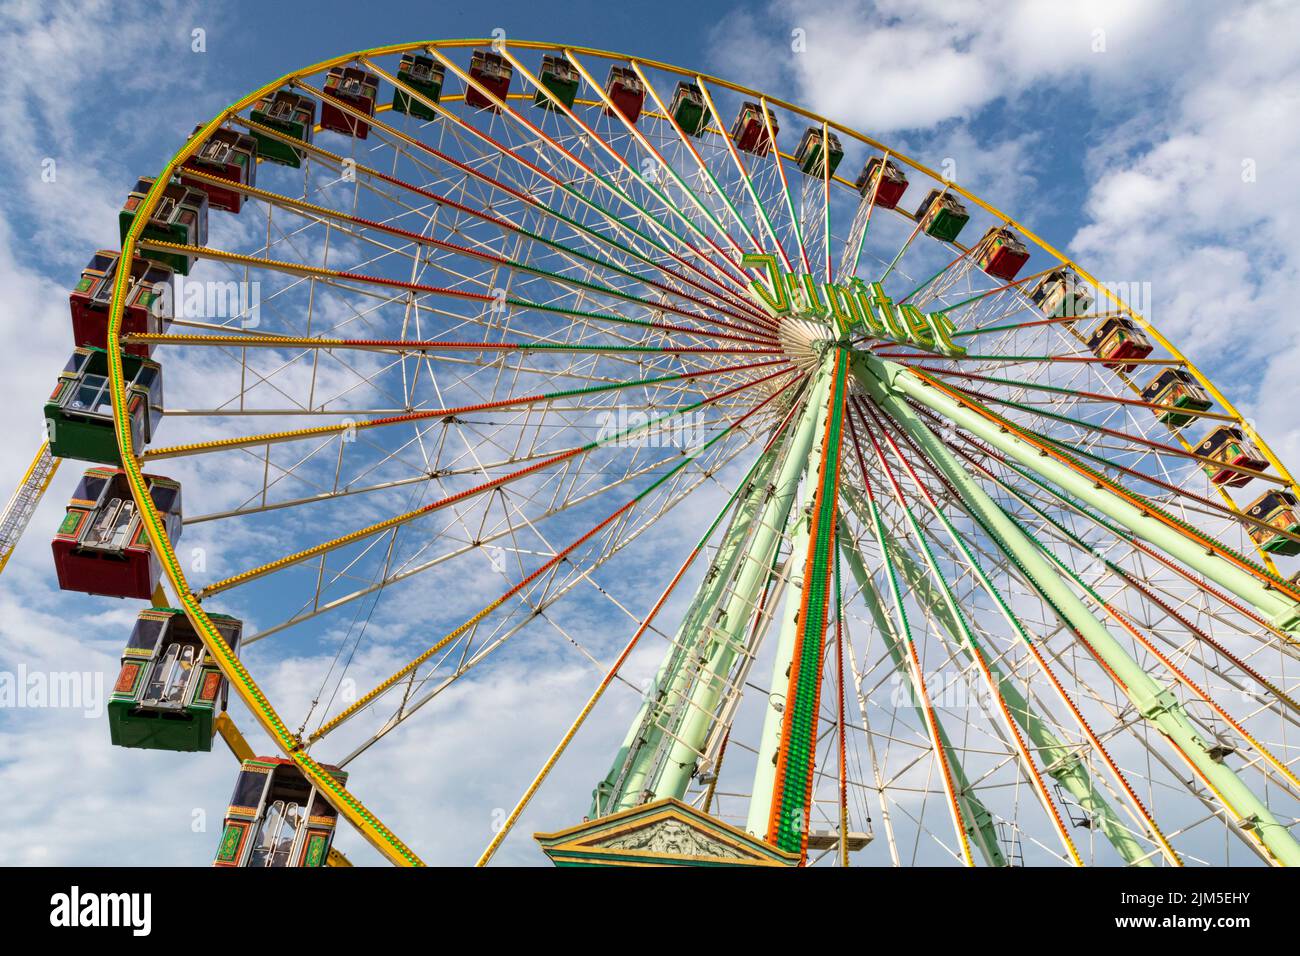 Cranger Kirmes, Herne, NRW, Germany, 04th Aug 2022. The Jupiter ferris wheel. Visitors enjoy the many attractions, roller coasters, beer halls, carousels and more at the Cranger Kirmes fun fair soft opening ahead of the official opening ceremony tomorrow. This is the first time it takes place since Covid restrictions took hold in 2020. The third largest fun-fair in Germany, and largest in Germany's most populous state NRW, usually attracts 4m  visitors over 10 days. It has a long tradition with fairs having taken place on the site since the early 18th century. Stock Photo